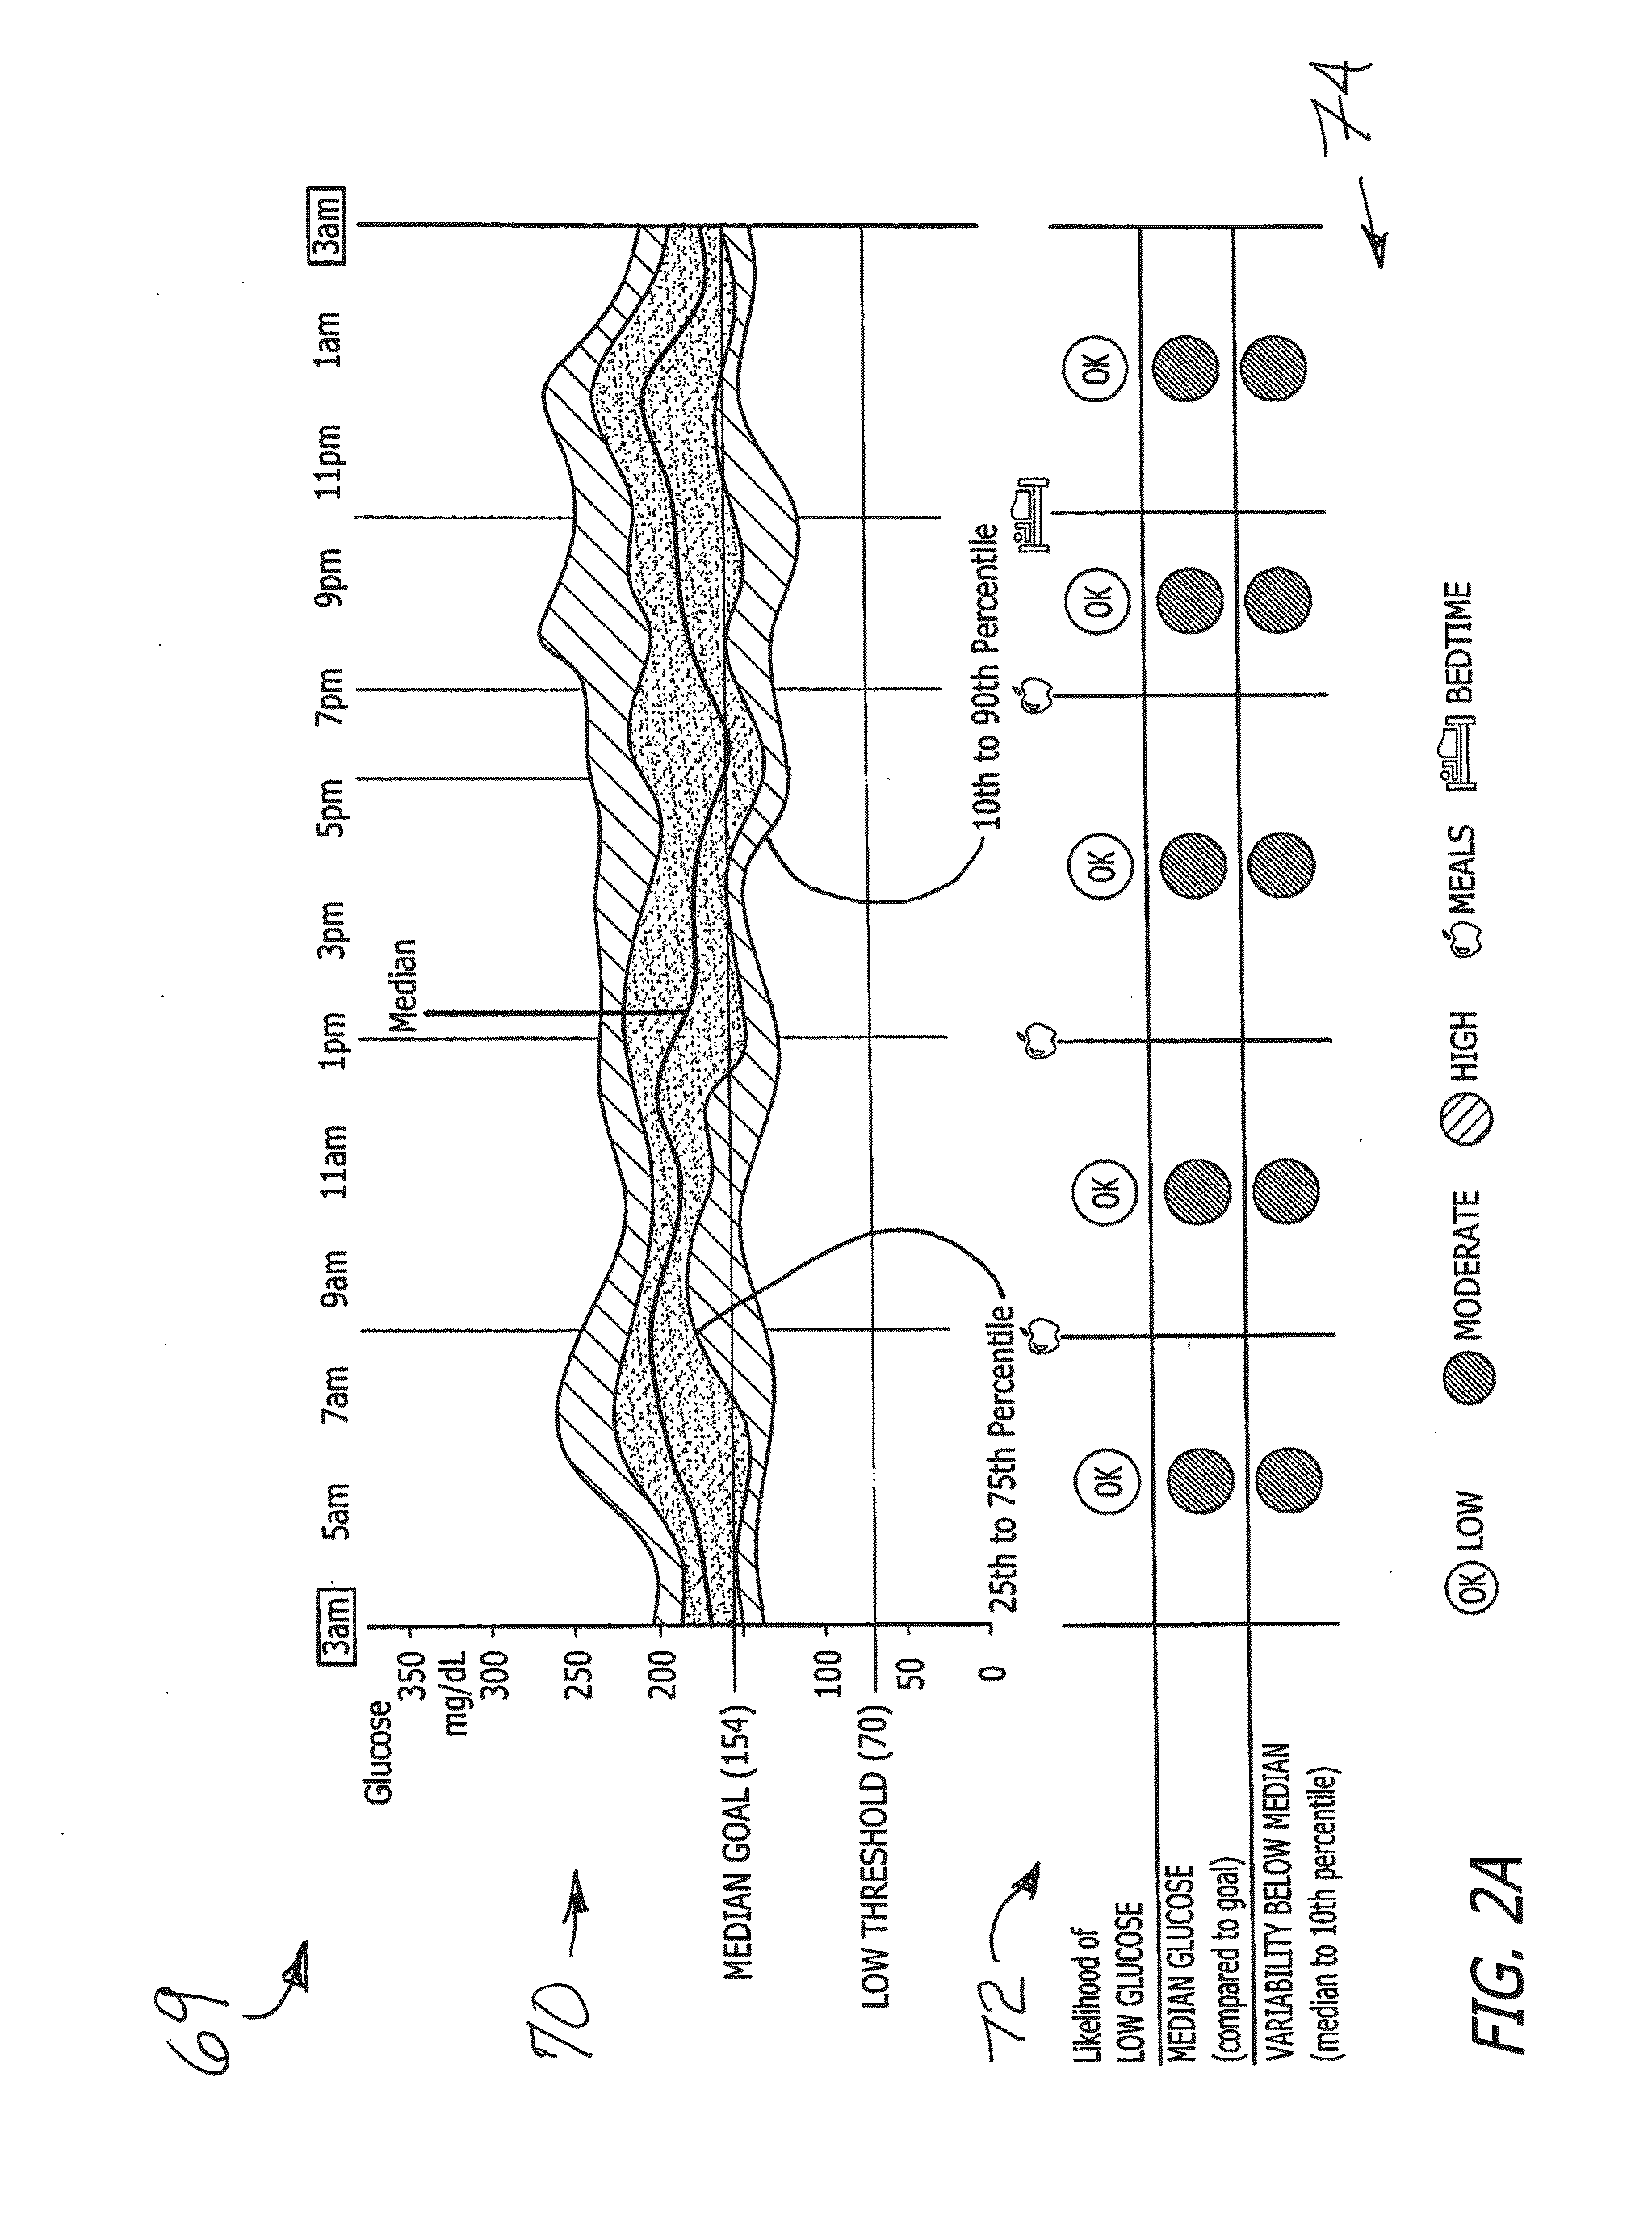 System and method to manage diabetes based on glucose median, glucose variability, and hypoglycemic risk